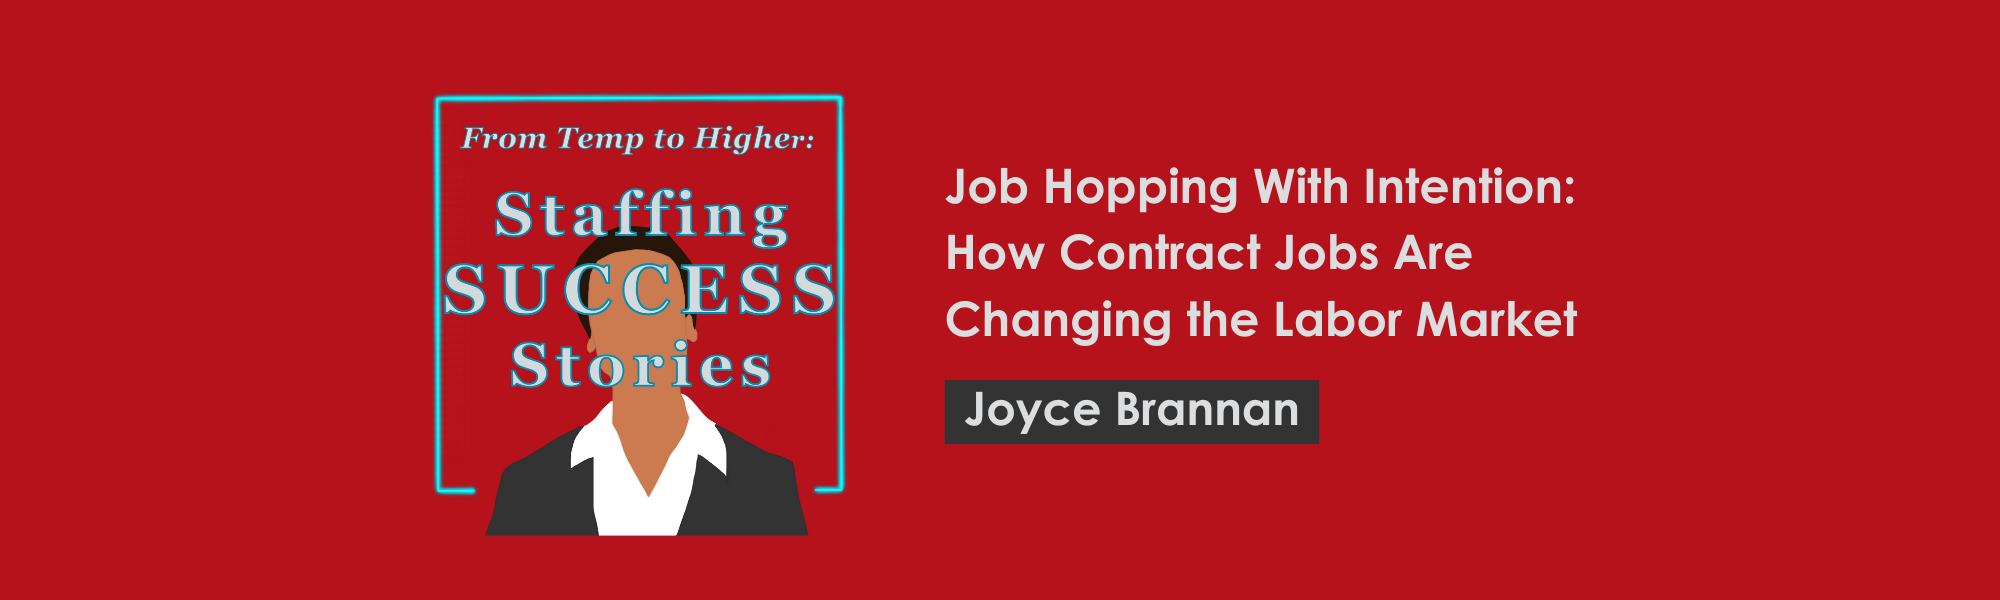 Job Hopping With Intention: How Contract Jobs Are Changing the Labor Market Hero Image